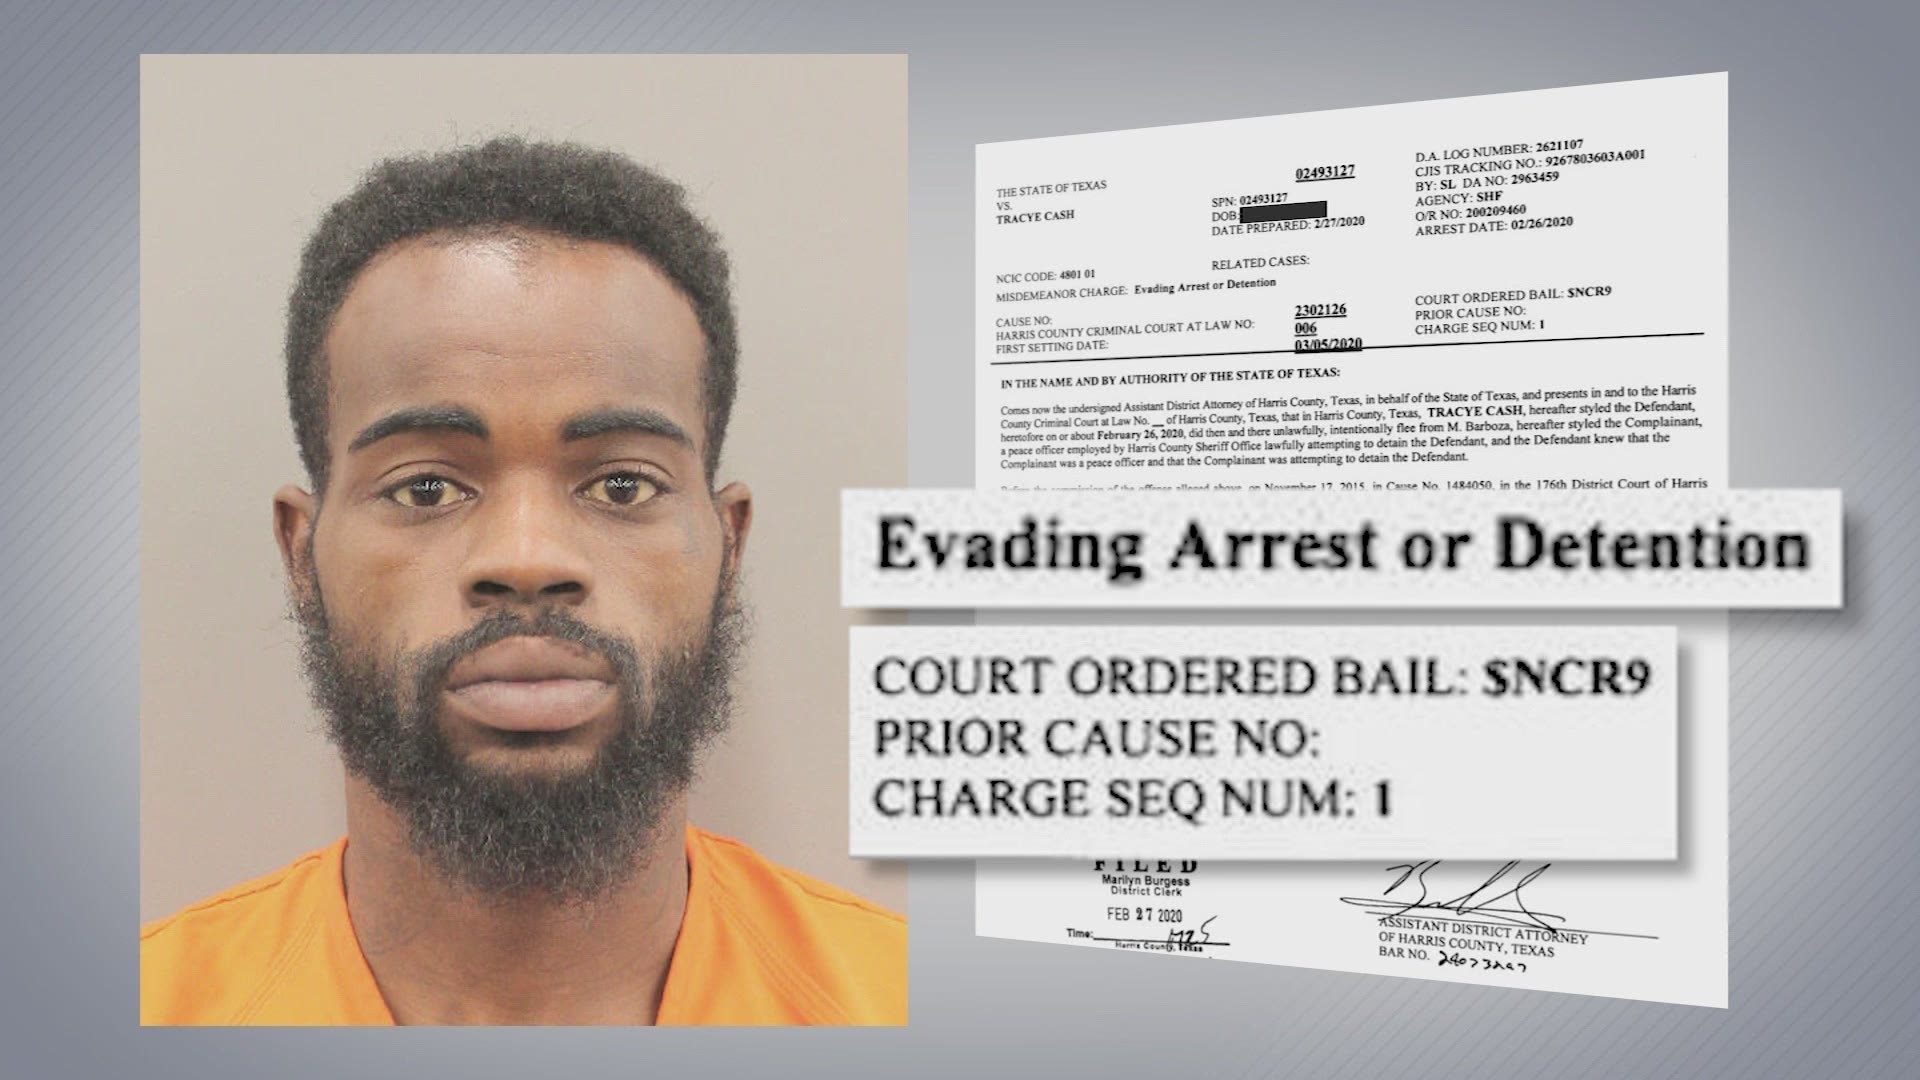 The man charged with murder, 28-year-old Tracye Cash, was out on bond. It's an issue lawmakers in Austin have been debating lately.